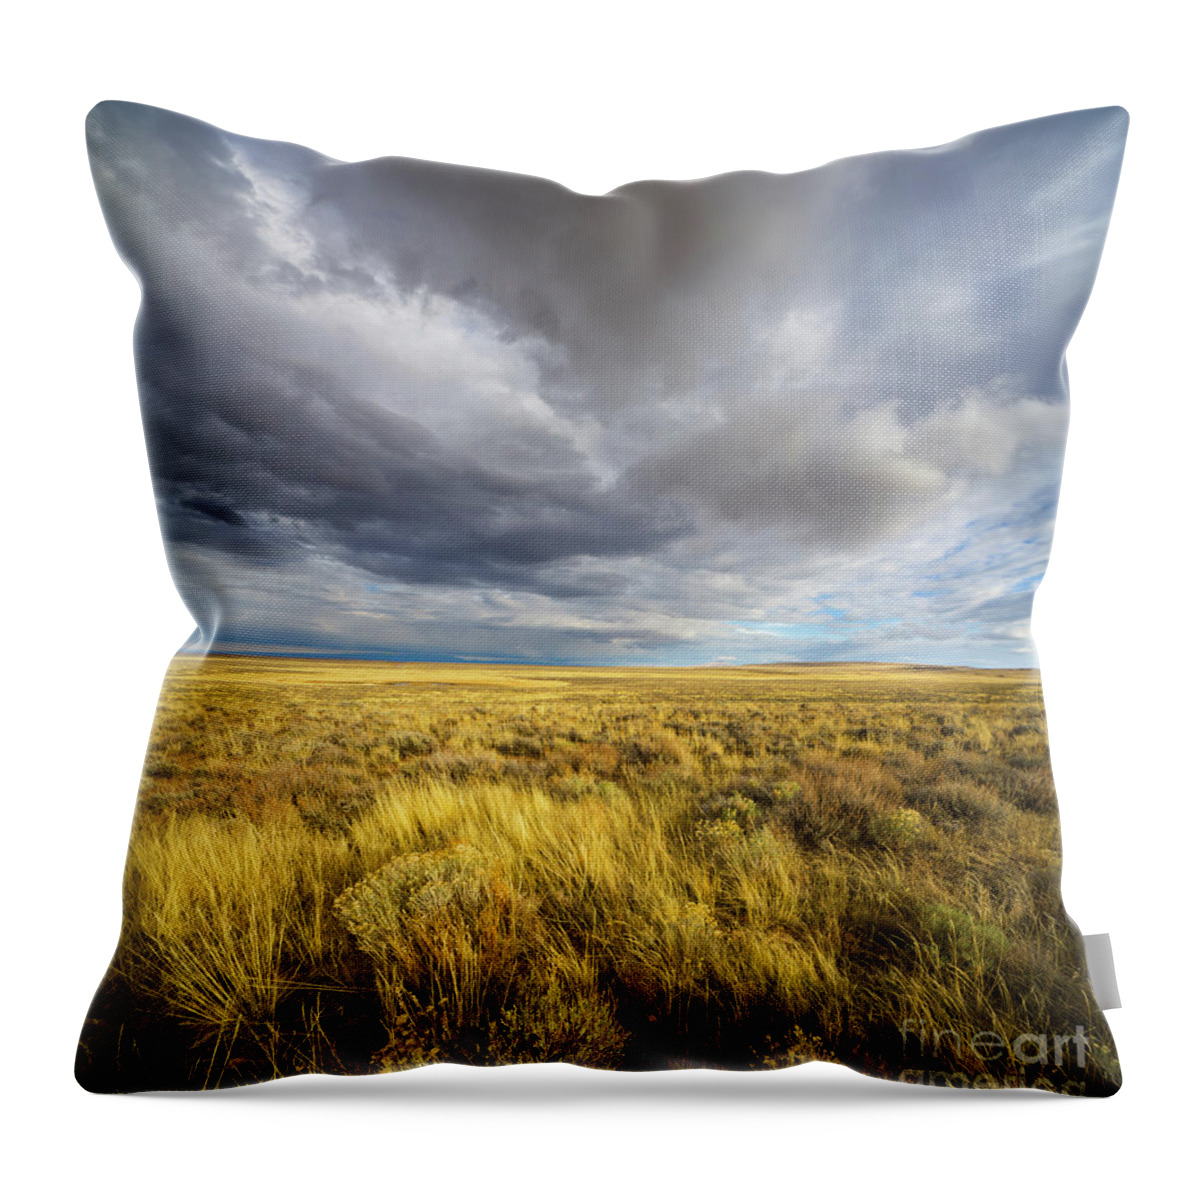 00463511 Throw Pillow featuring the photograph Clouds and Prairie Hart Mt N R by Yva Momatiuk John Eastcott